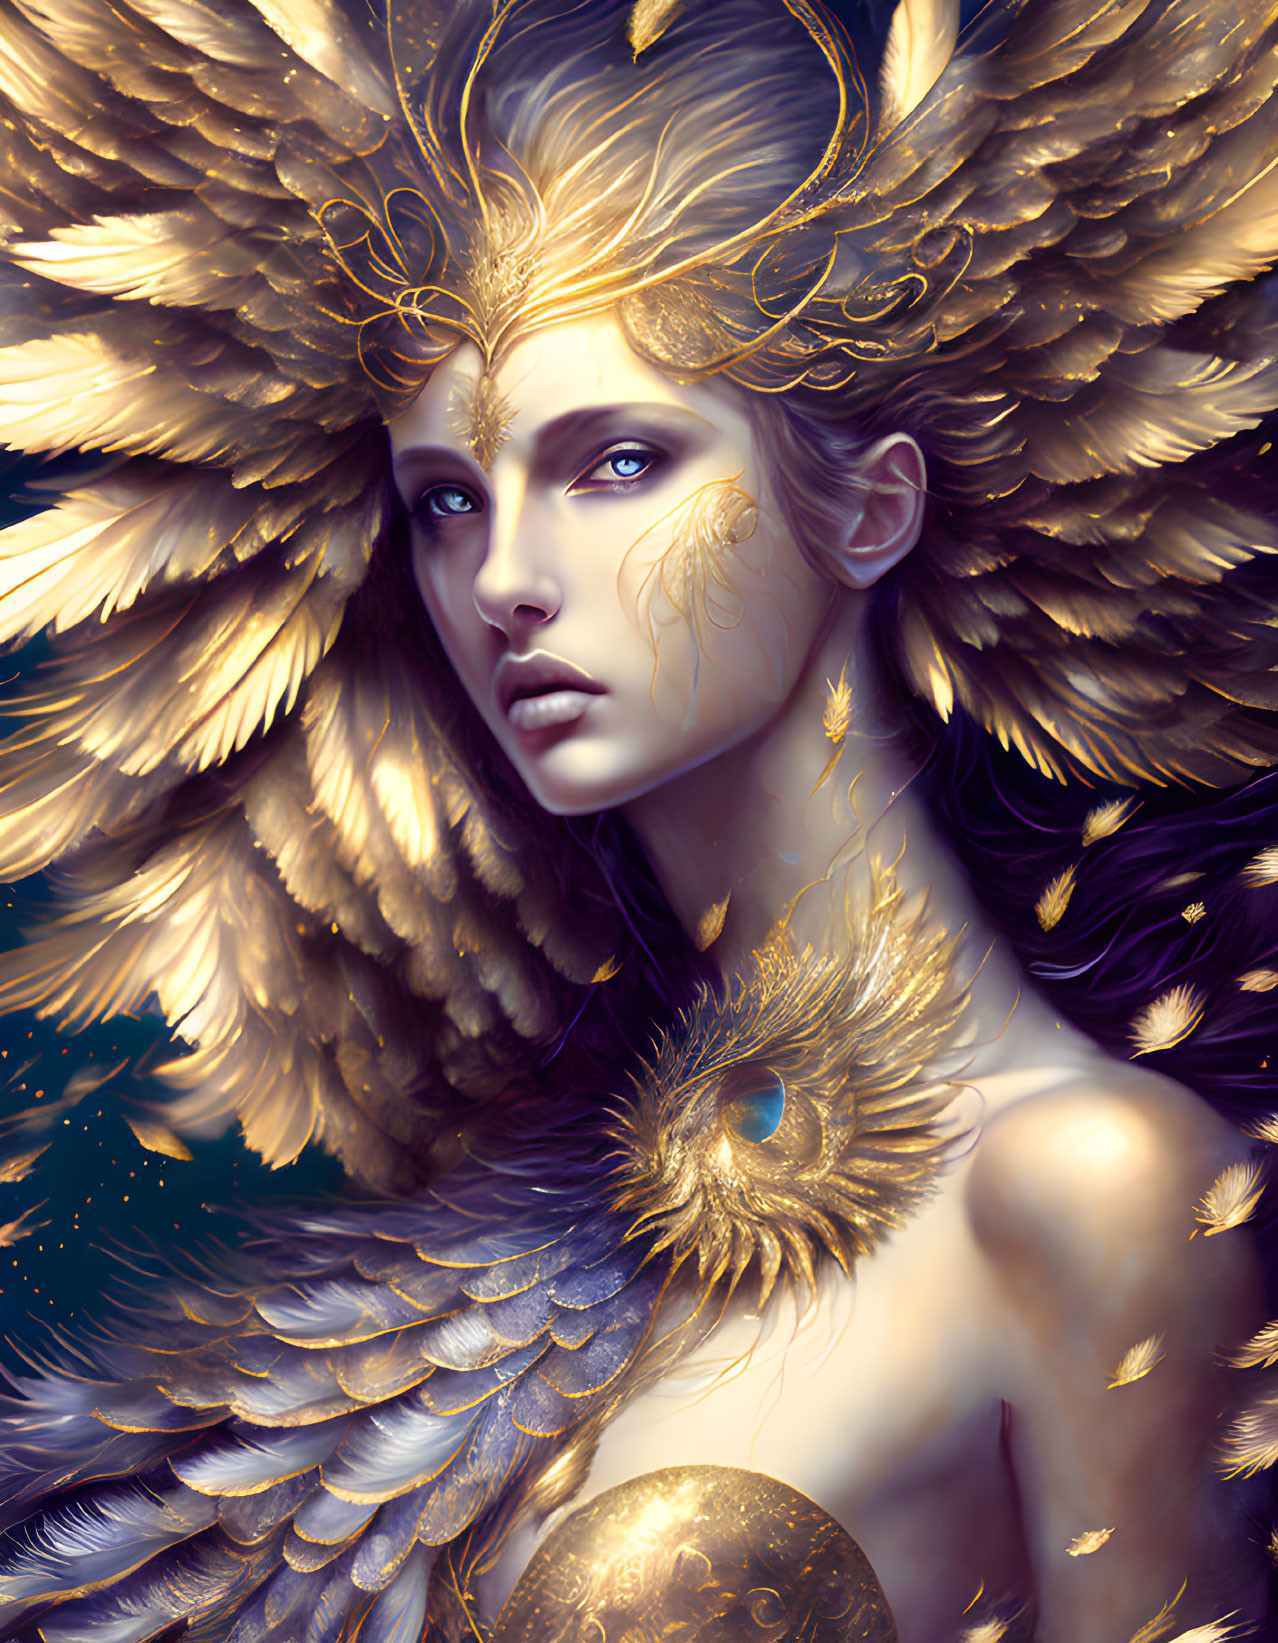 Golden-winged woman with ornate headpiece and peacock feather accent